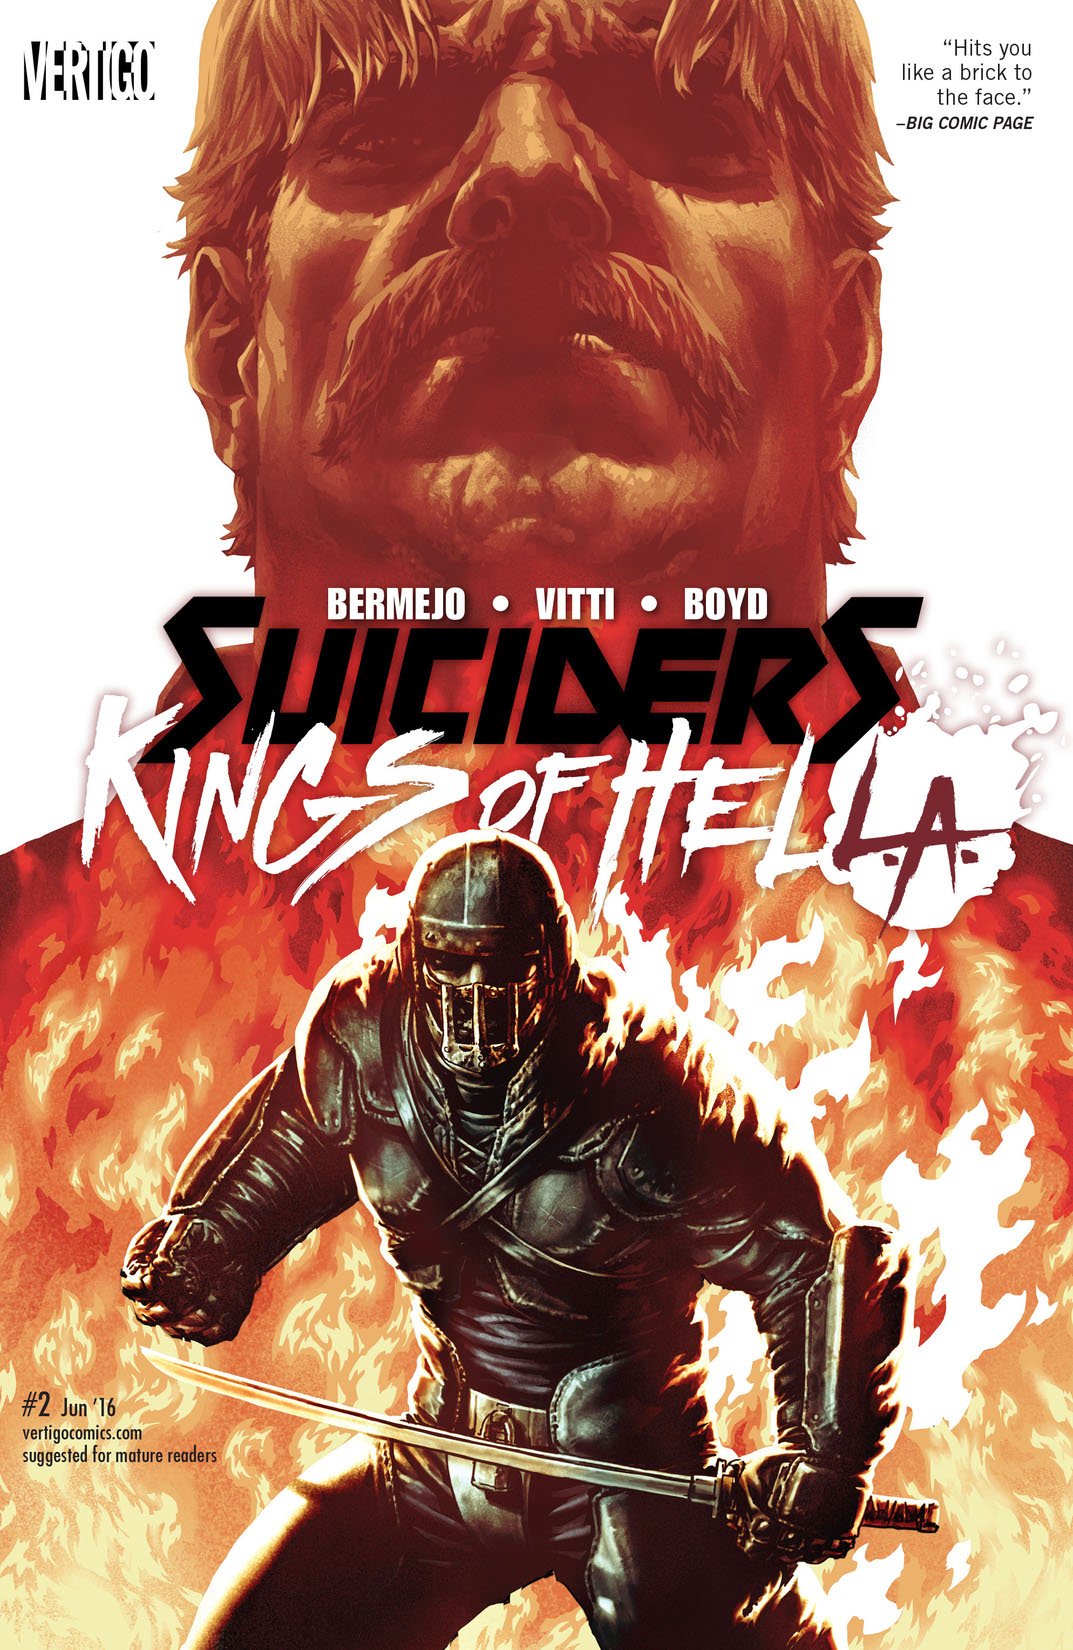 Suiciders: Kings of HelL.A. #2 preview images